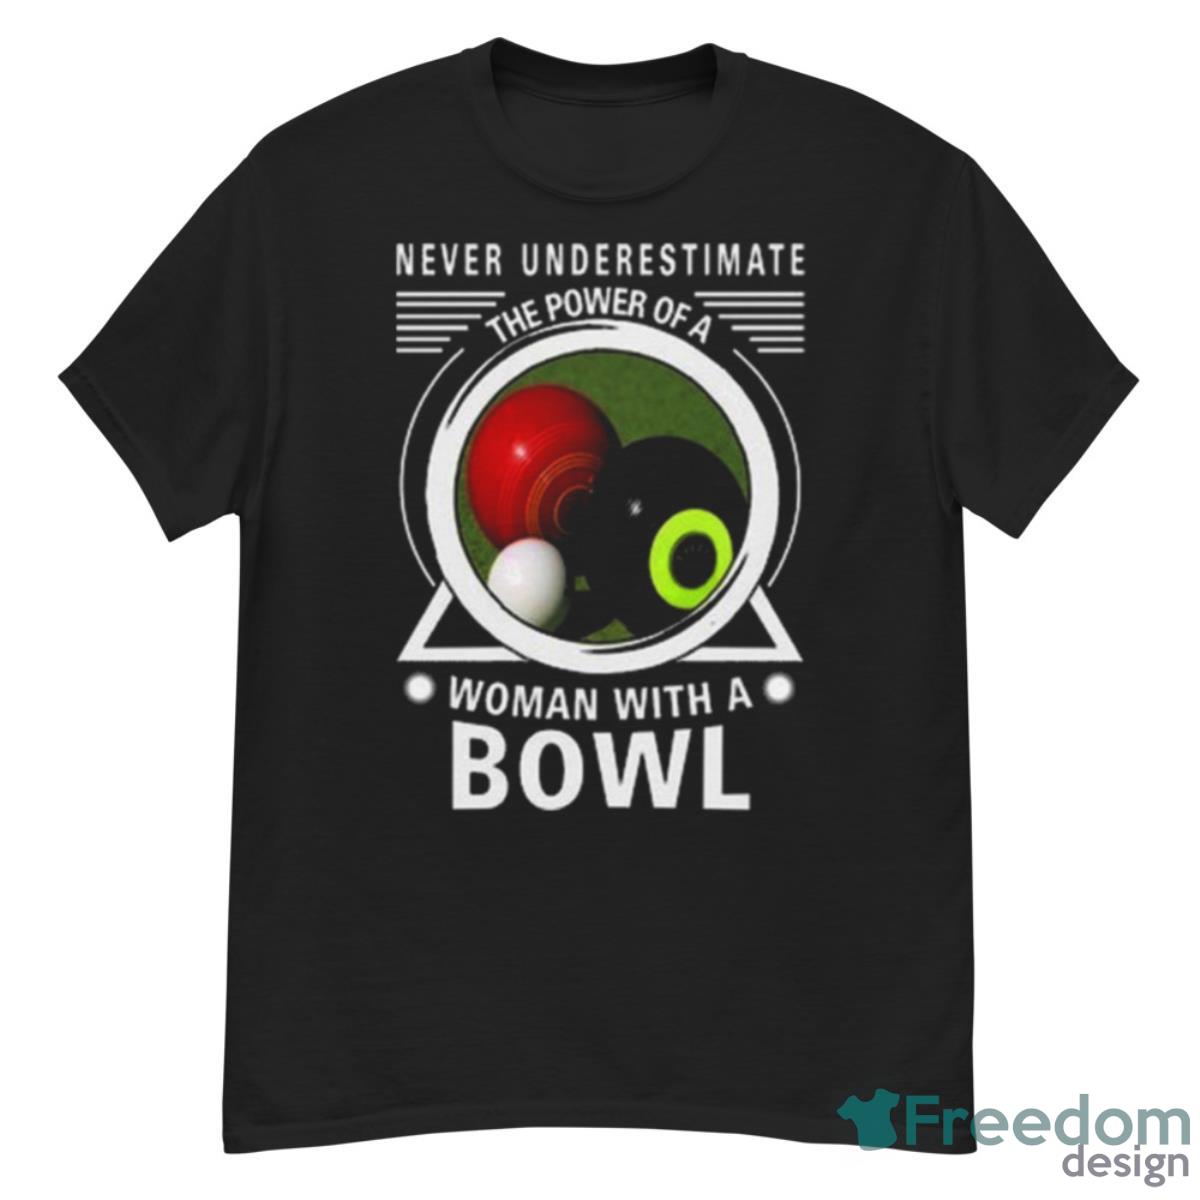 Never Underestimate The Power Of A Woman With A Bowl Shirt - G500 Men’s Classic T-Shirt